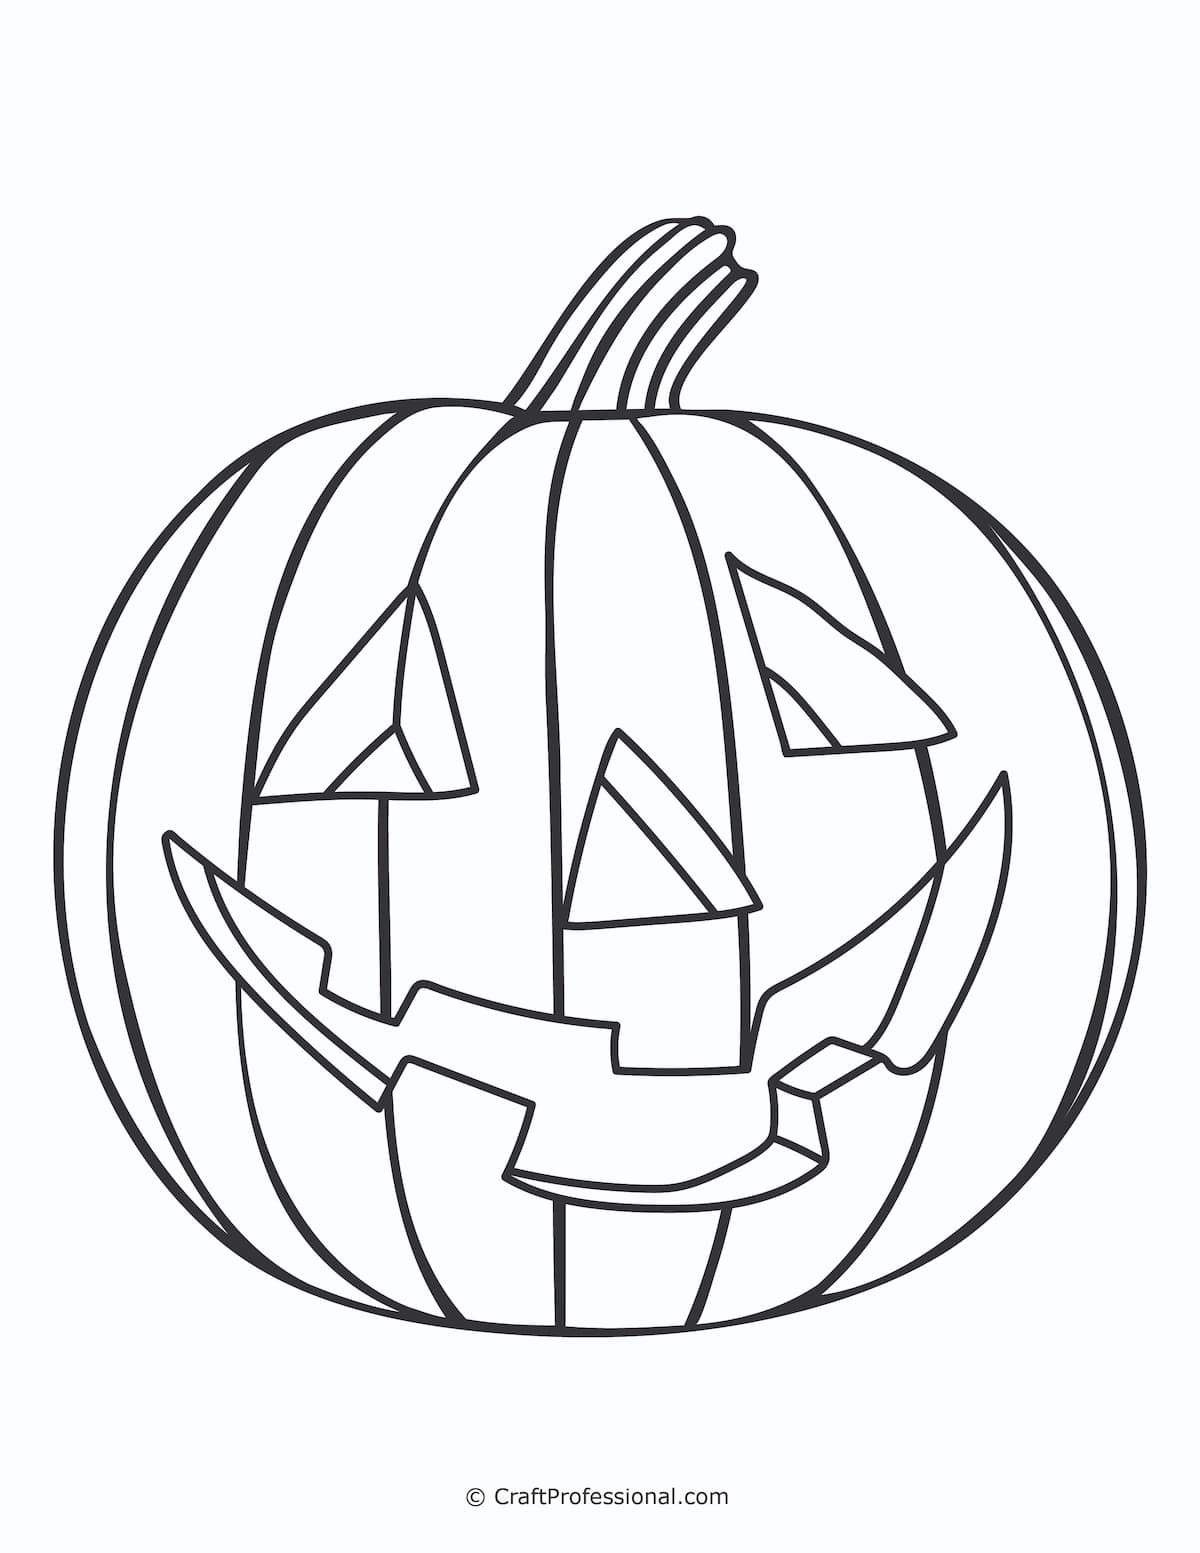 12 Pumpkin Coloring Pages - Free Printables for Kids & Adults to Color